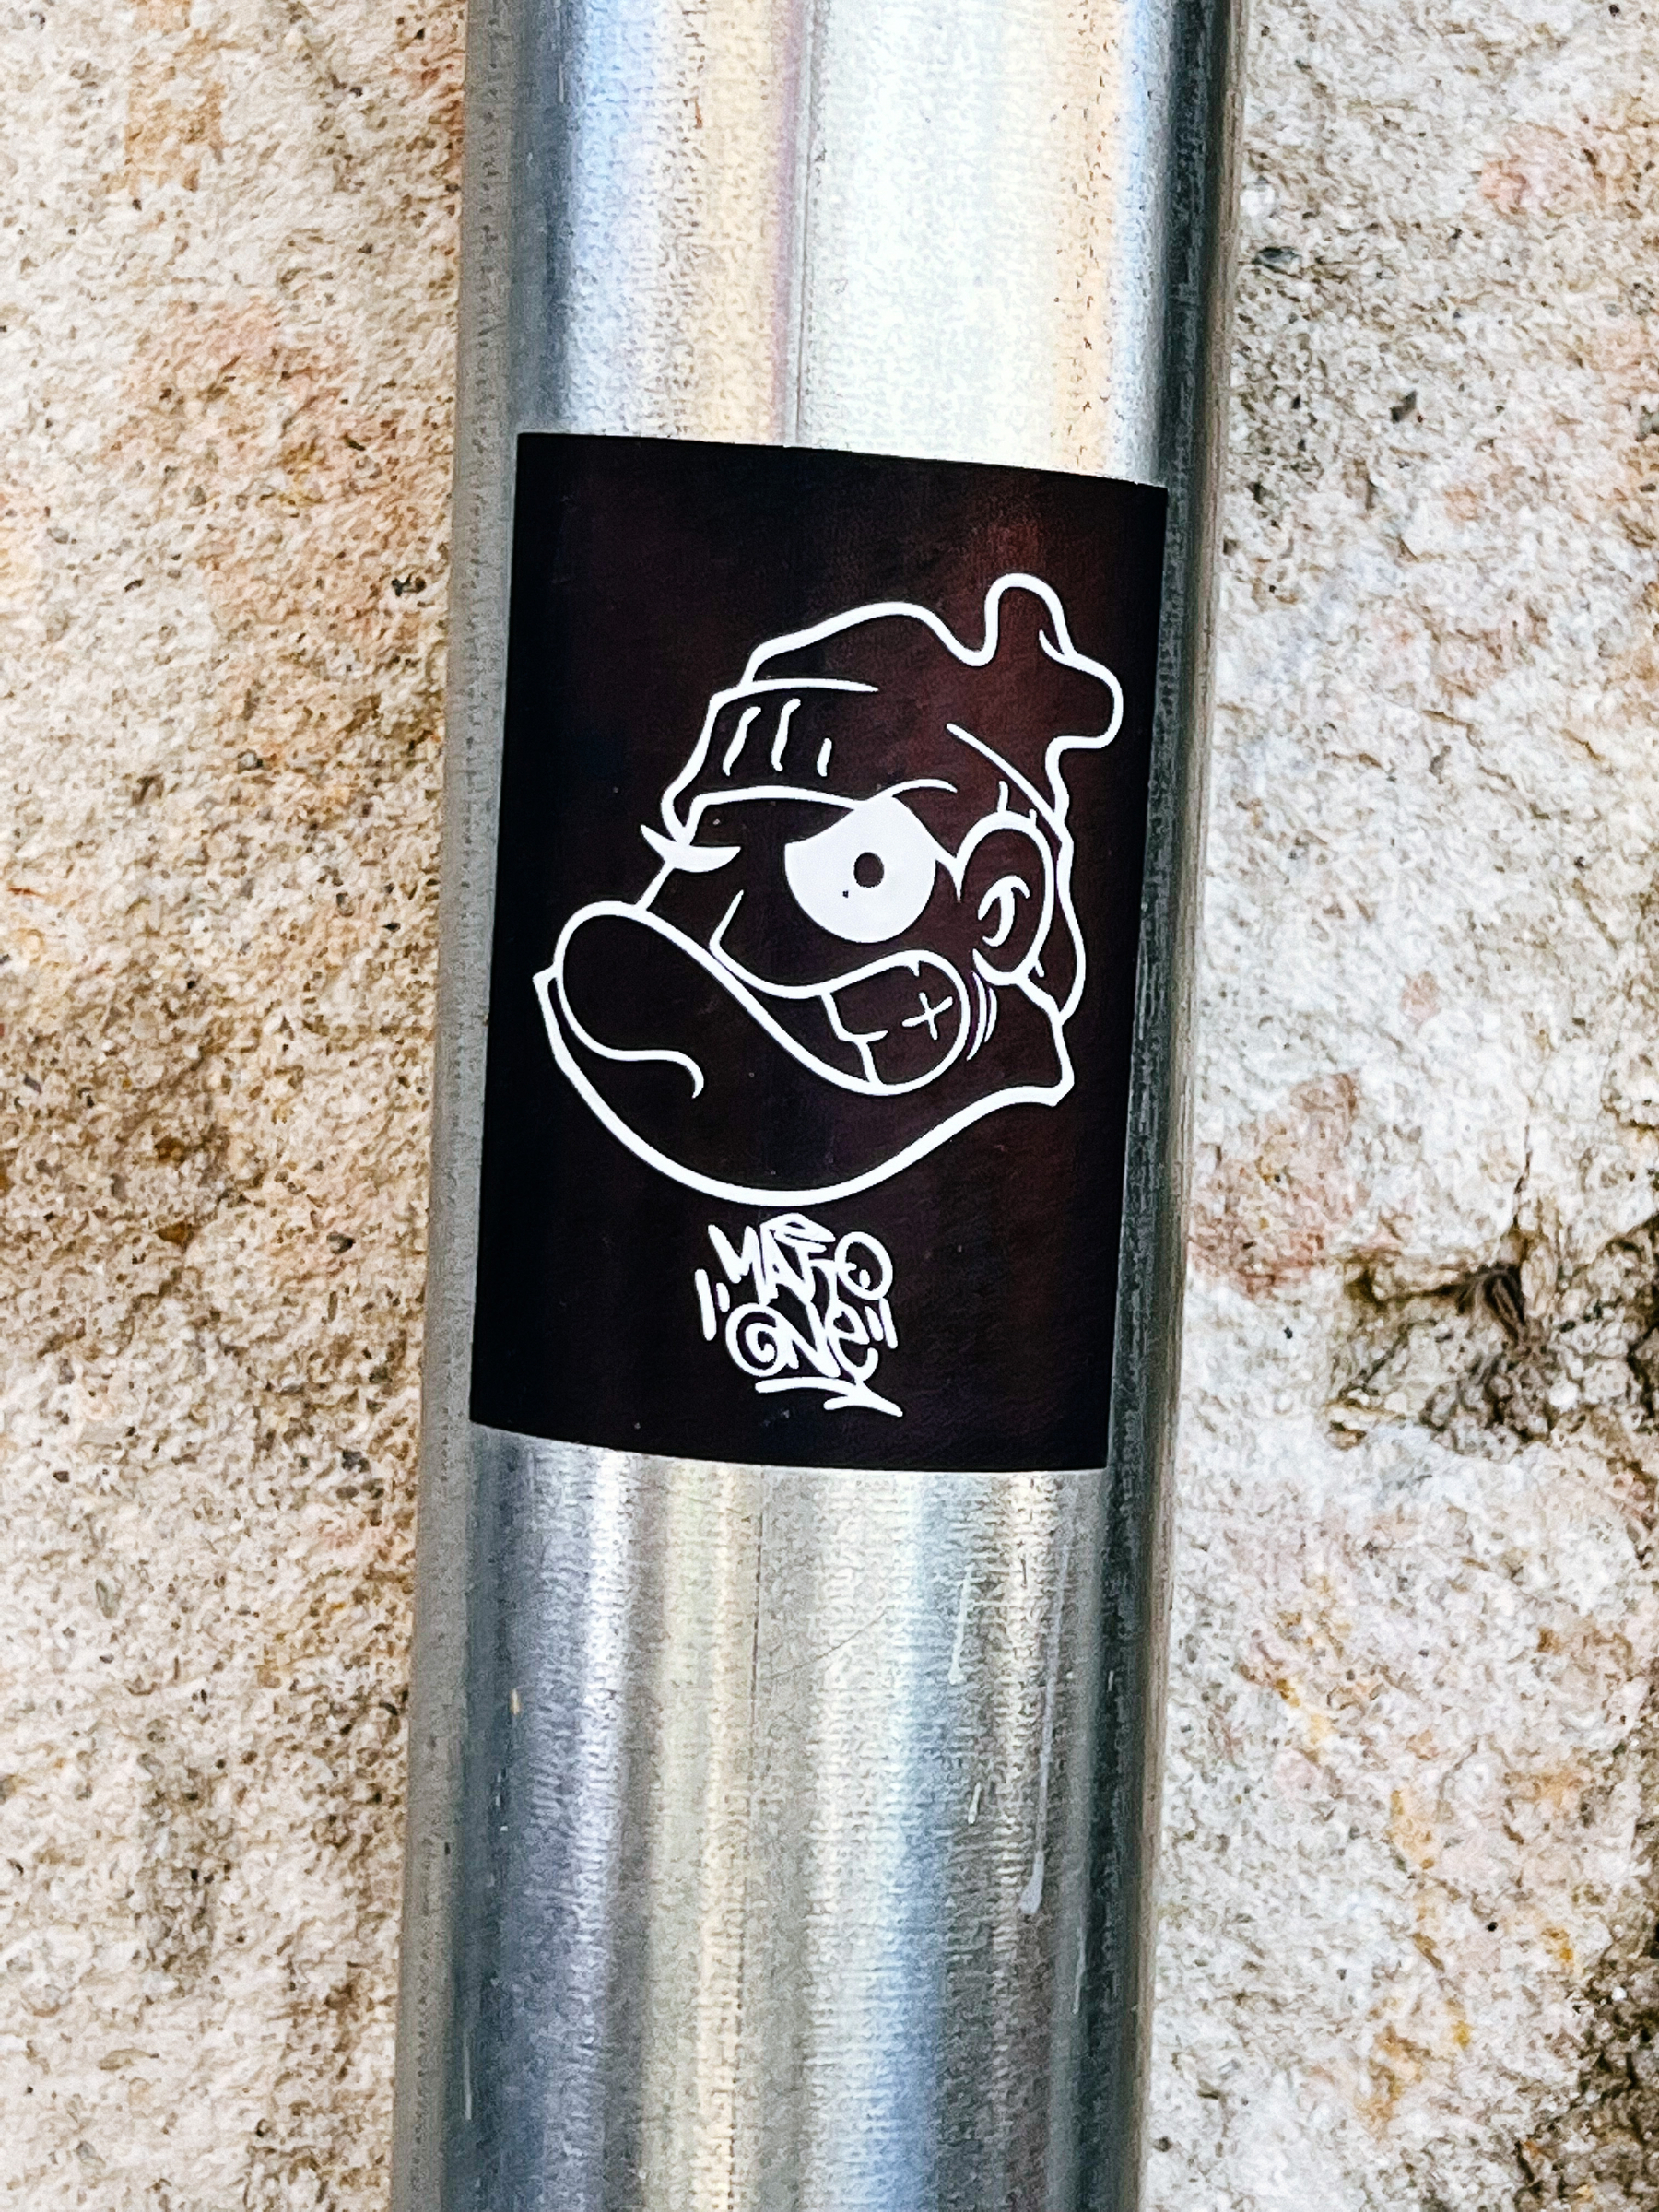 Sticker of a cartoon drawing of a tough guy clenching his jaw, wearing a beanie. 